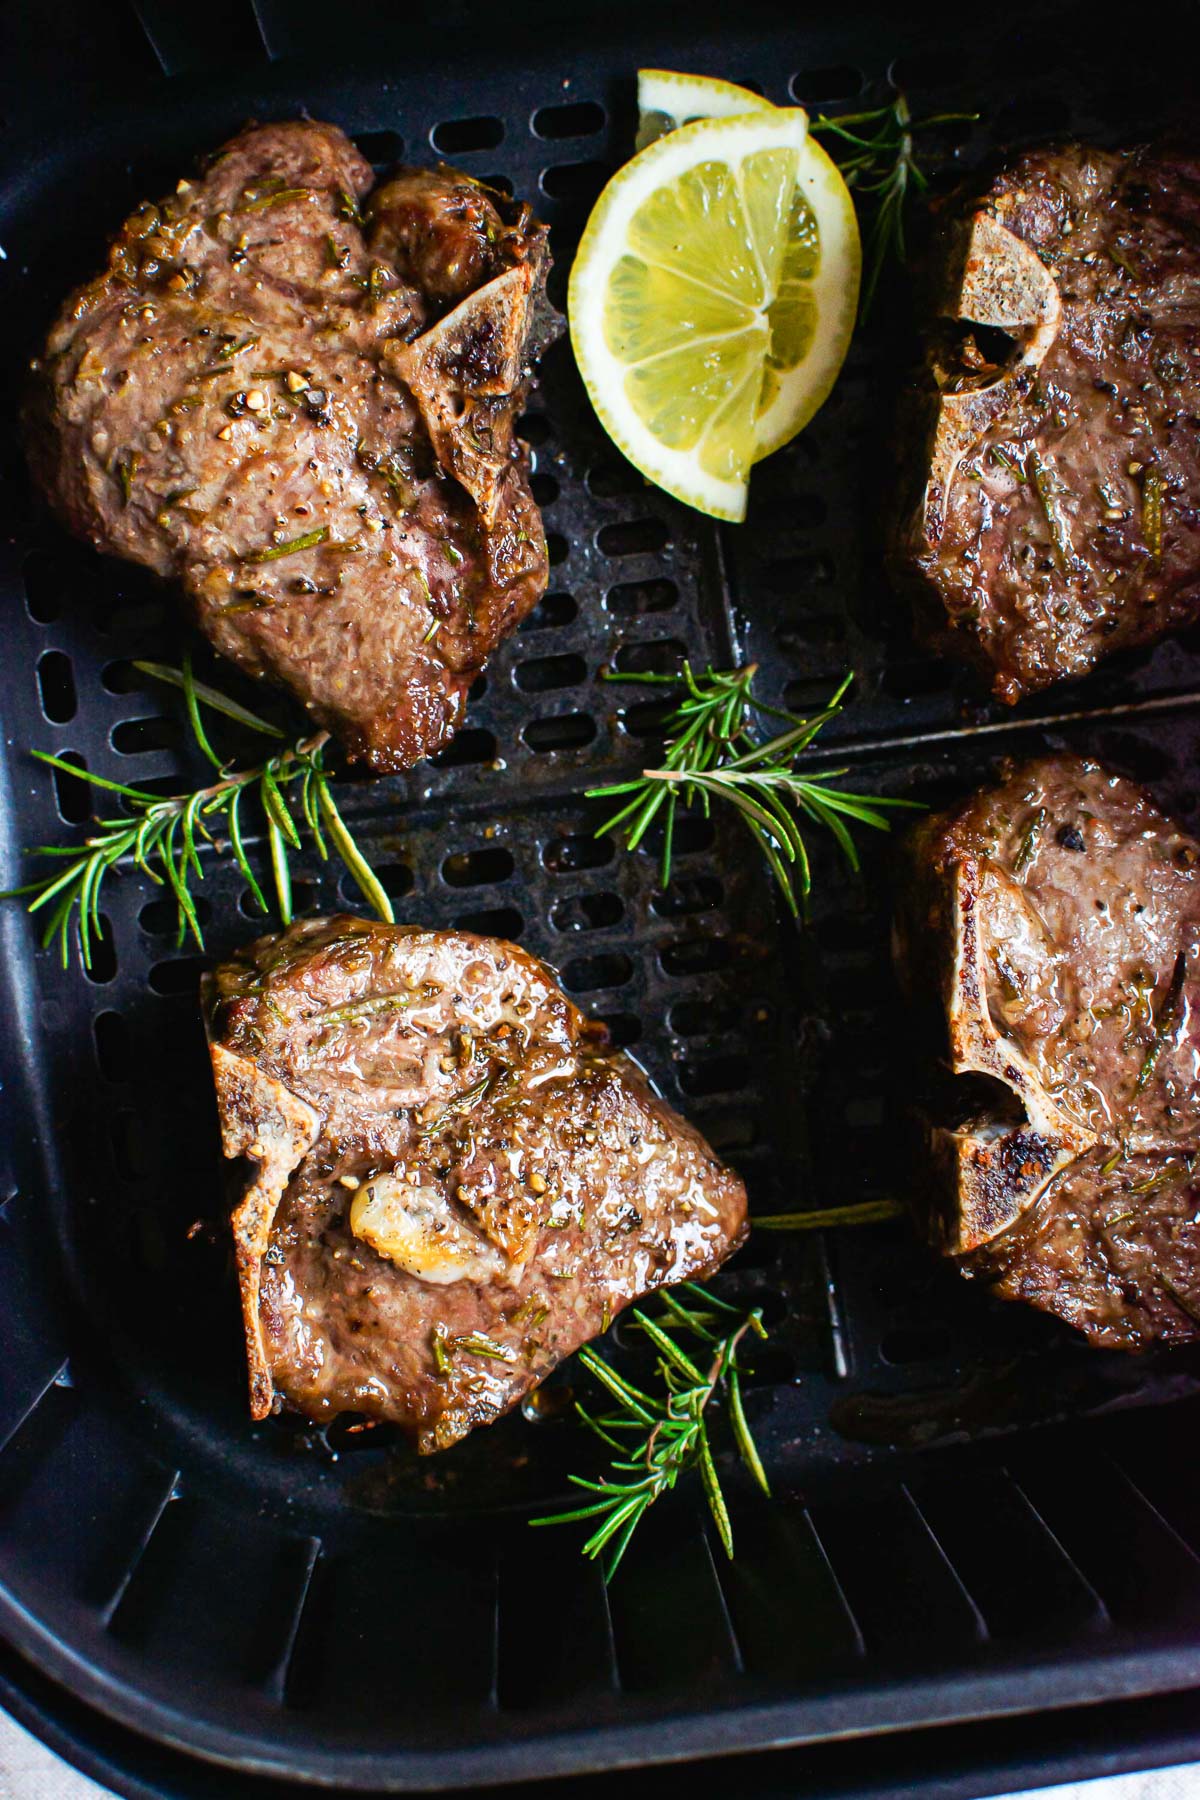 Lamb chops in air fryer with rosemary sprigs and lemon.